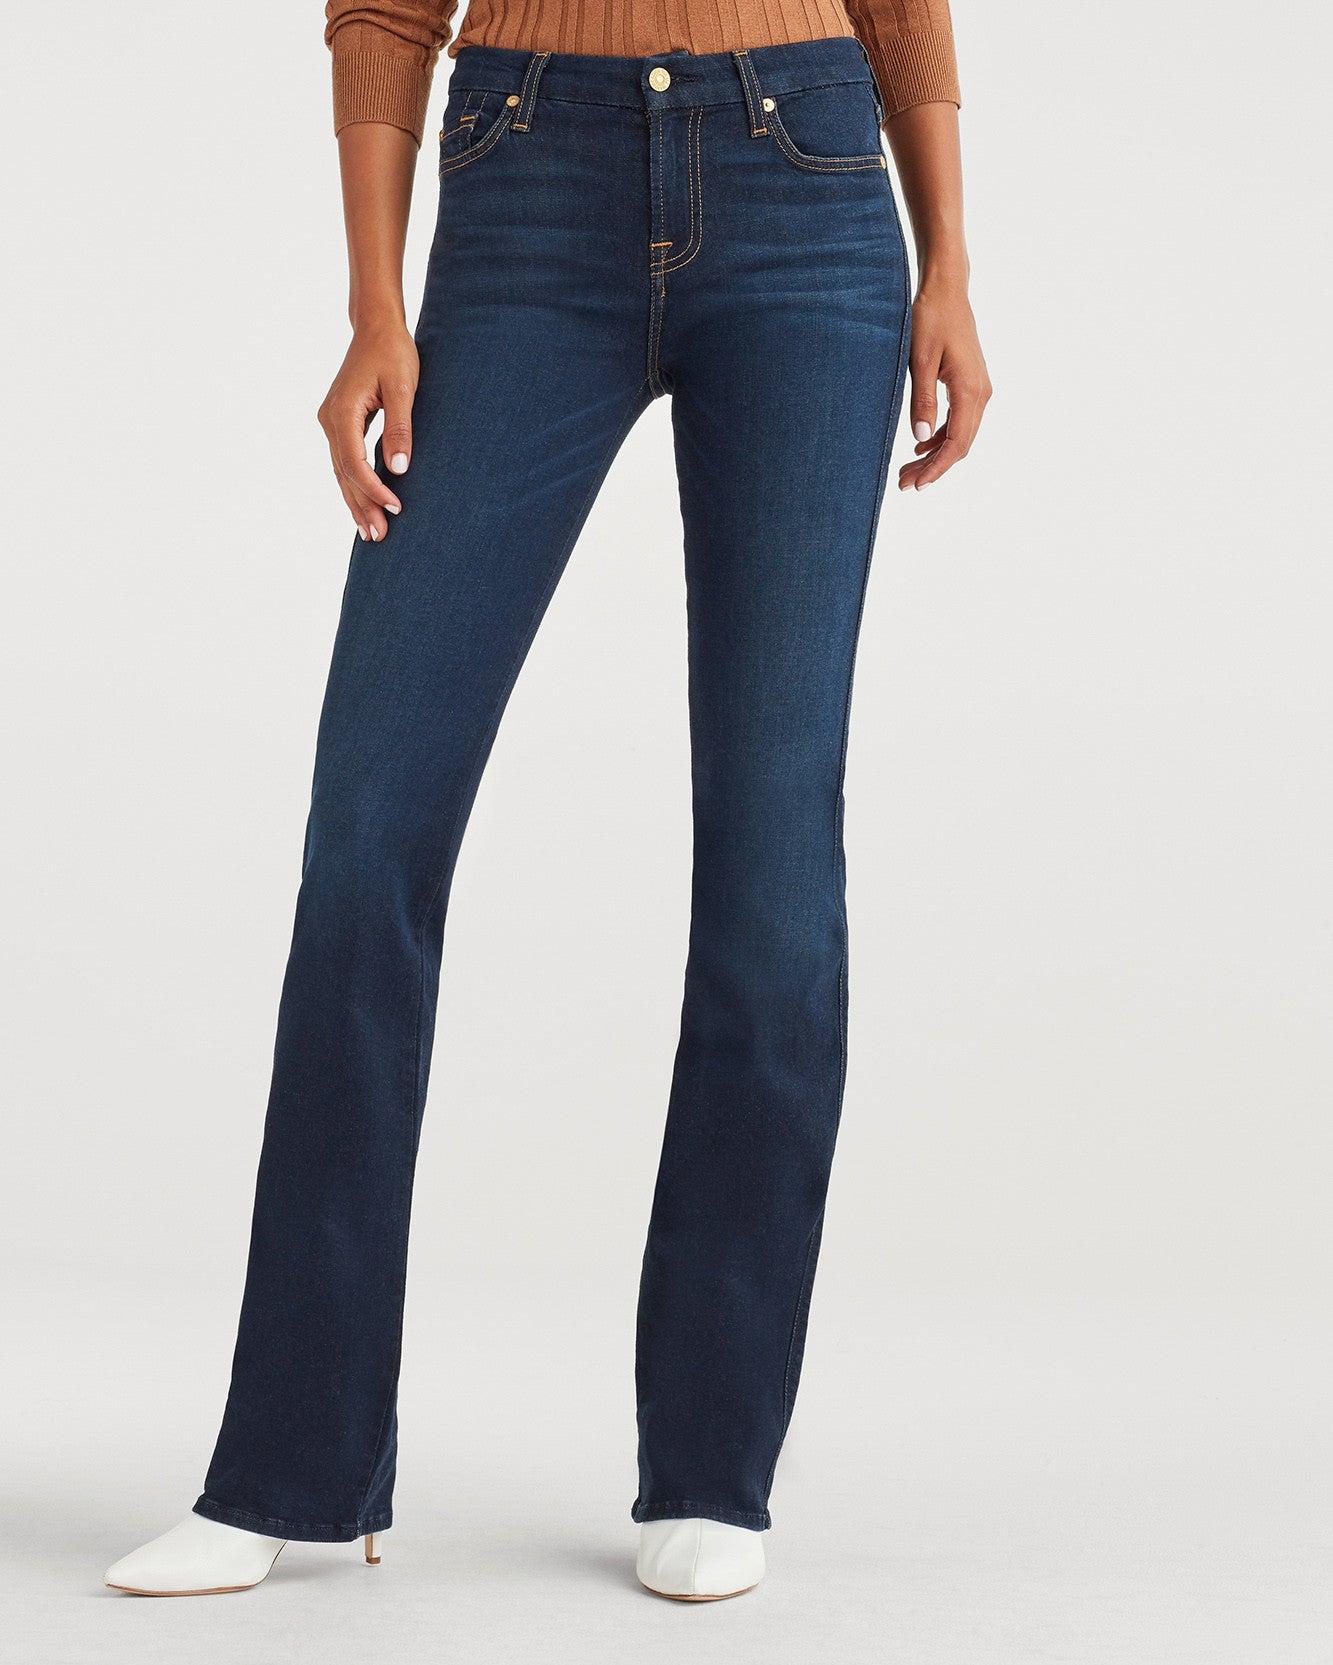 7 For All Mankind Denim Slim Illusion Kimmie Bootcut In Tried And True ...